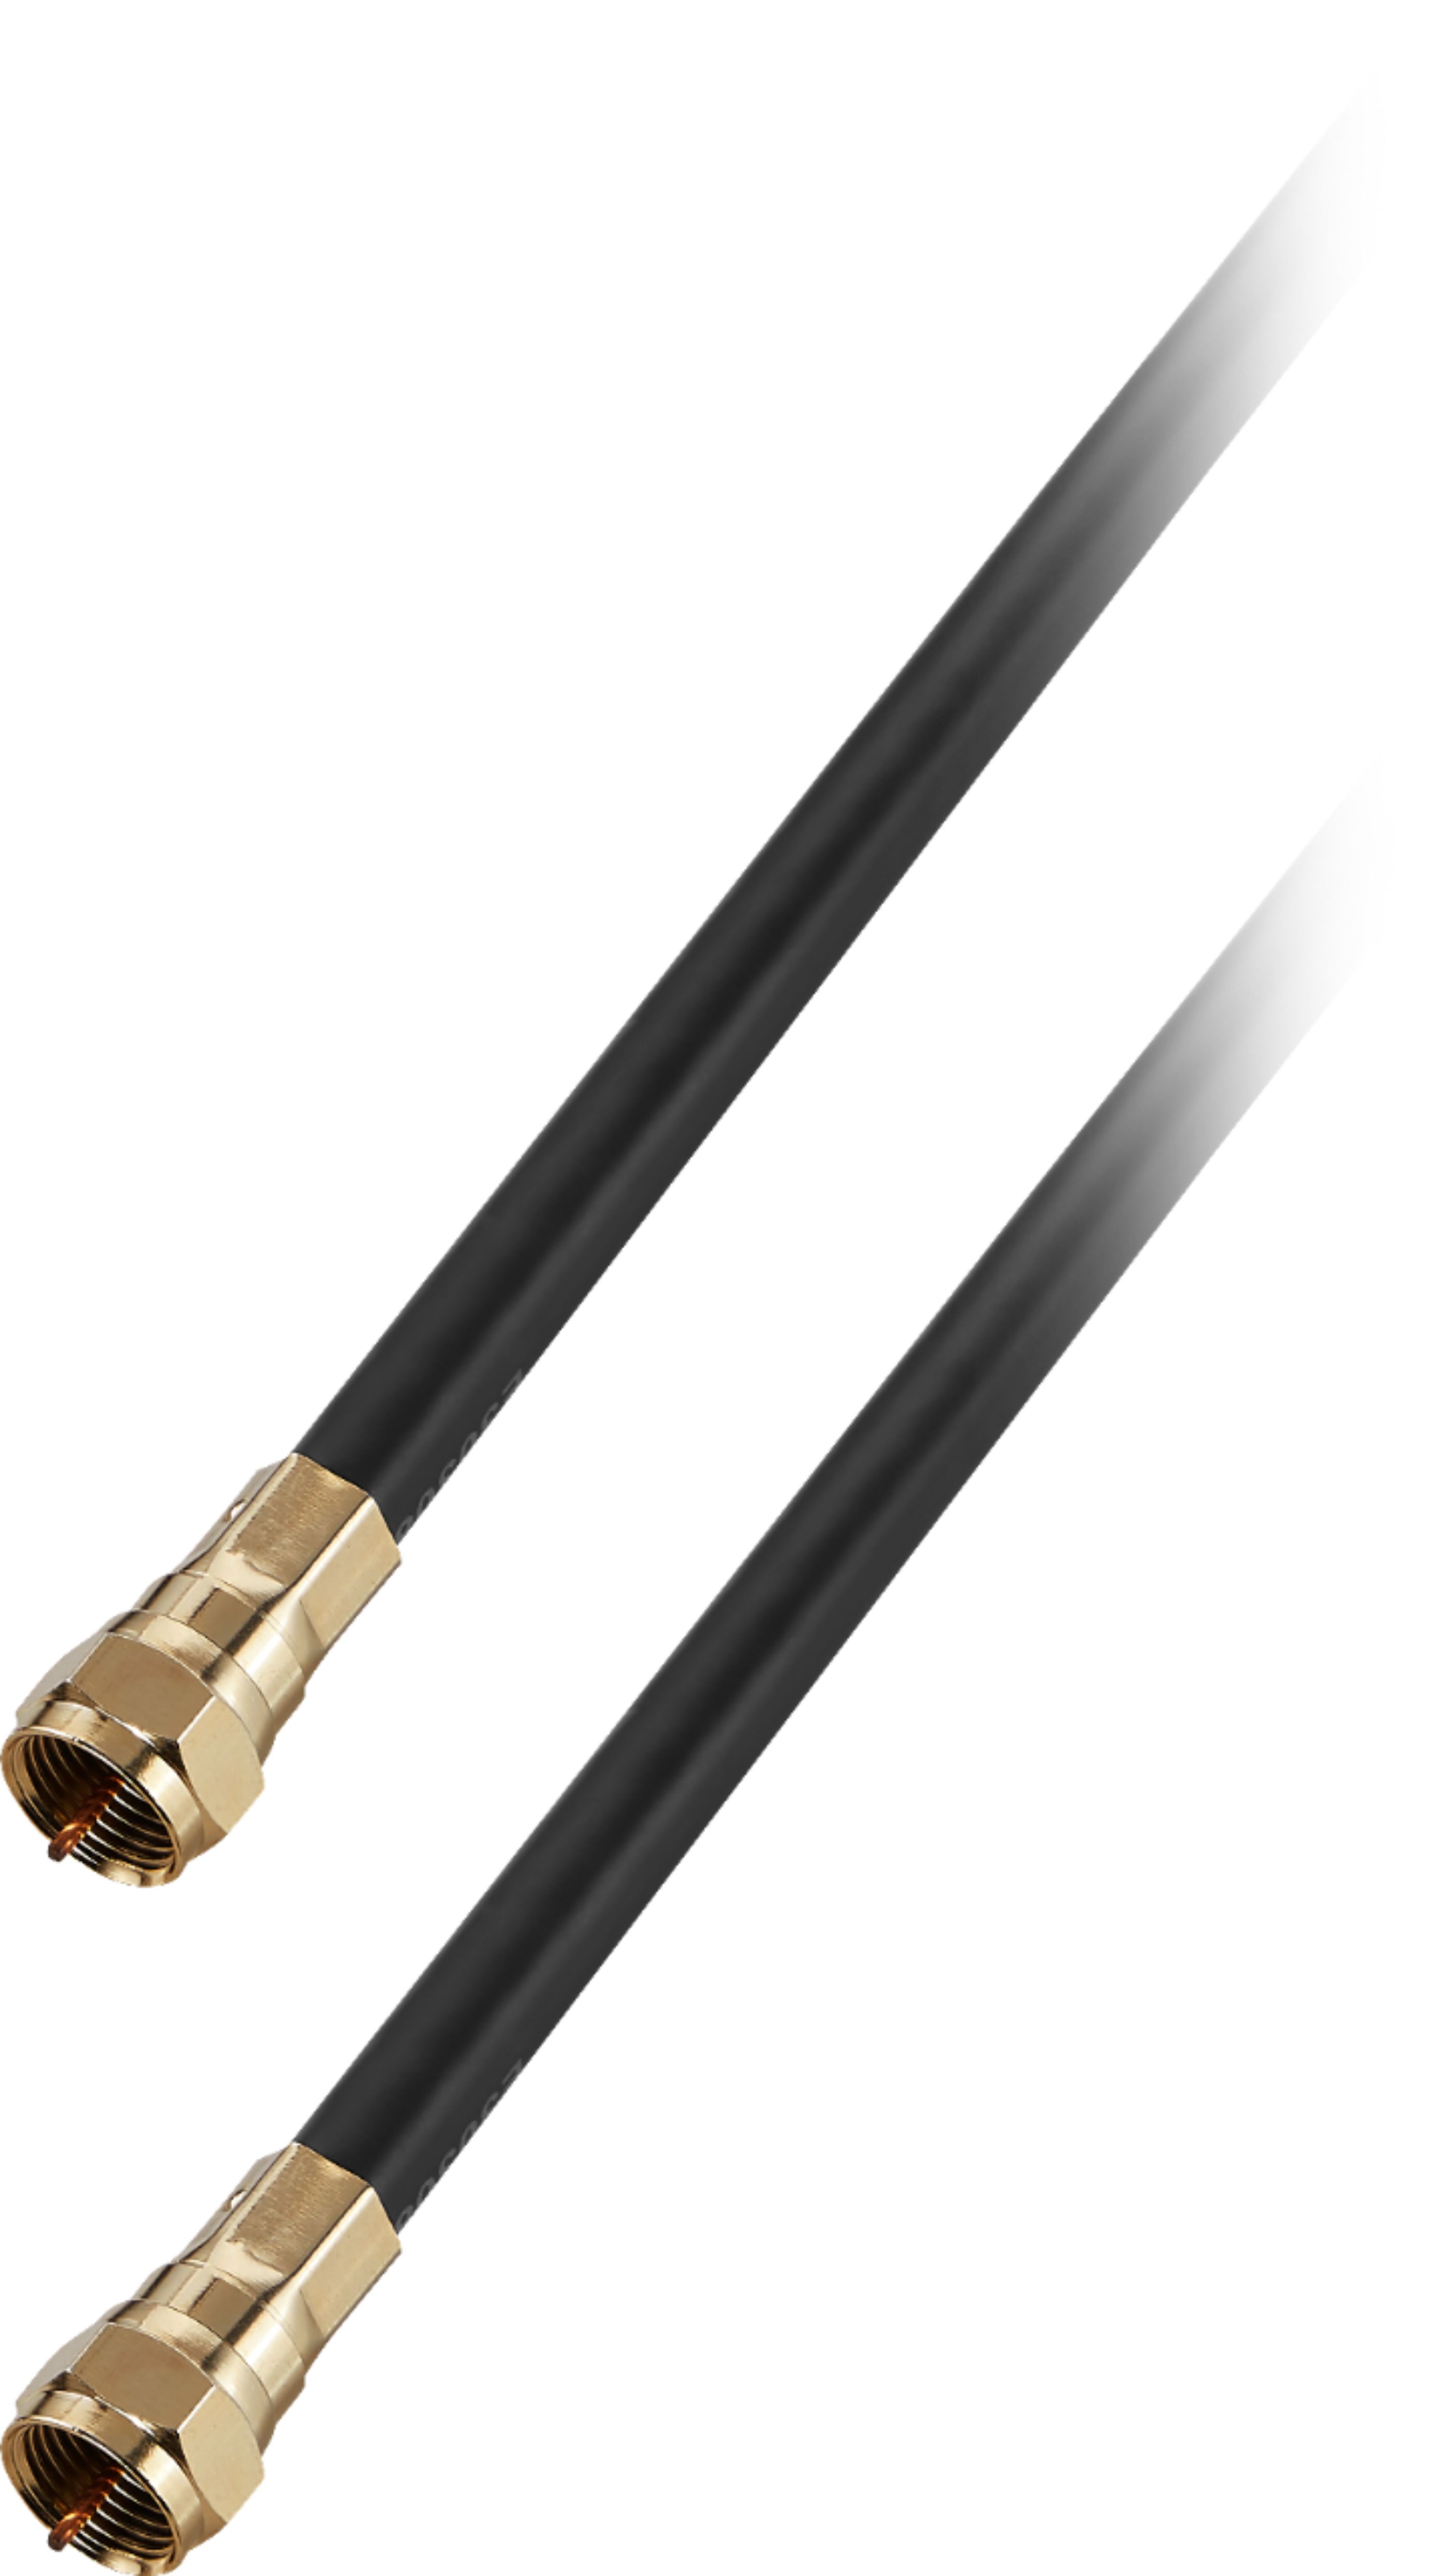 Angle View: Rocketfish™ - 25' Indoor/Outdoor RG6 Coaxial Cable - Black